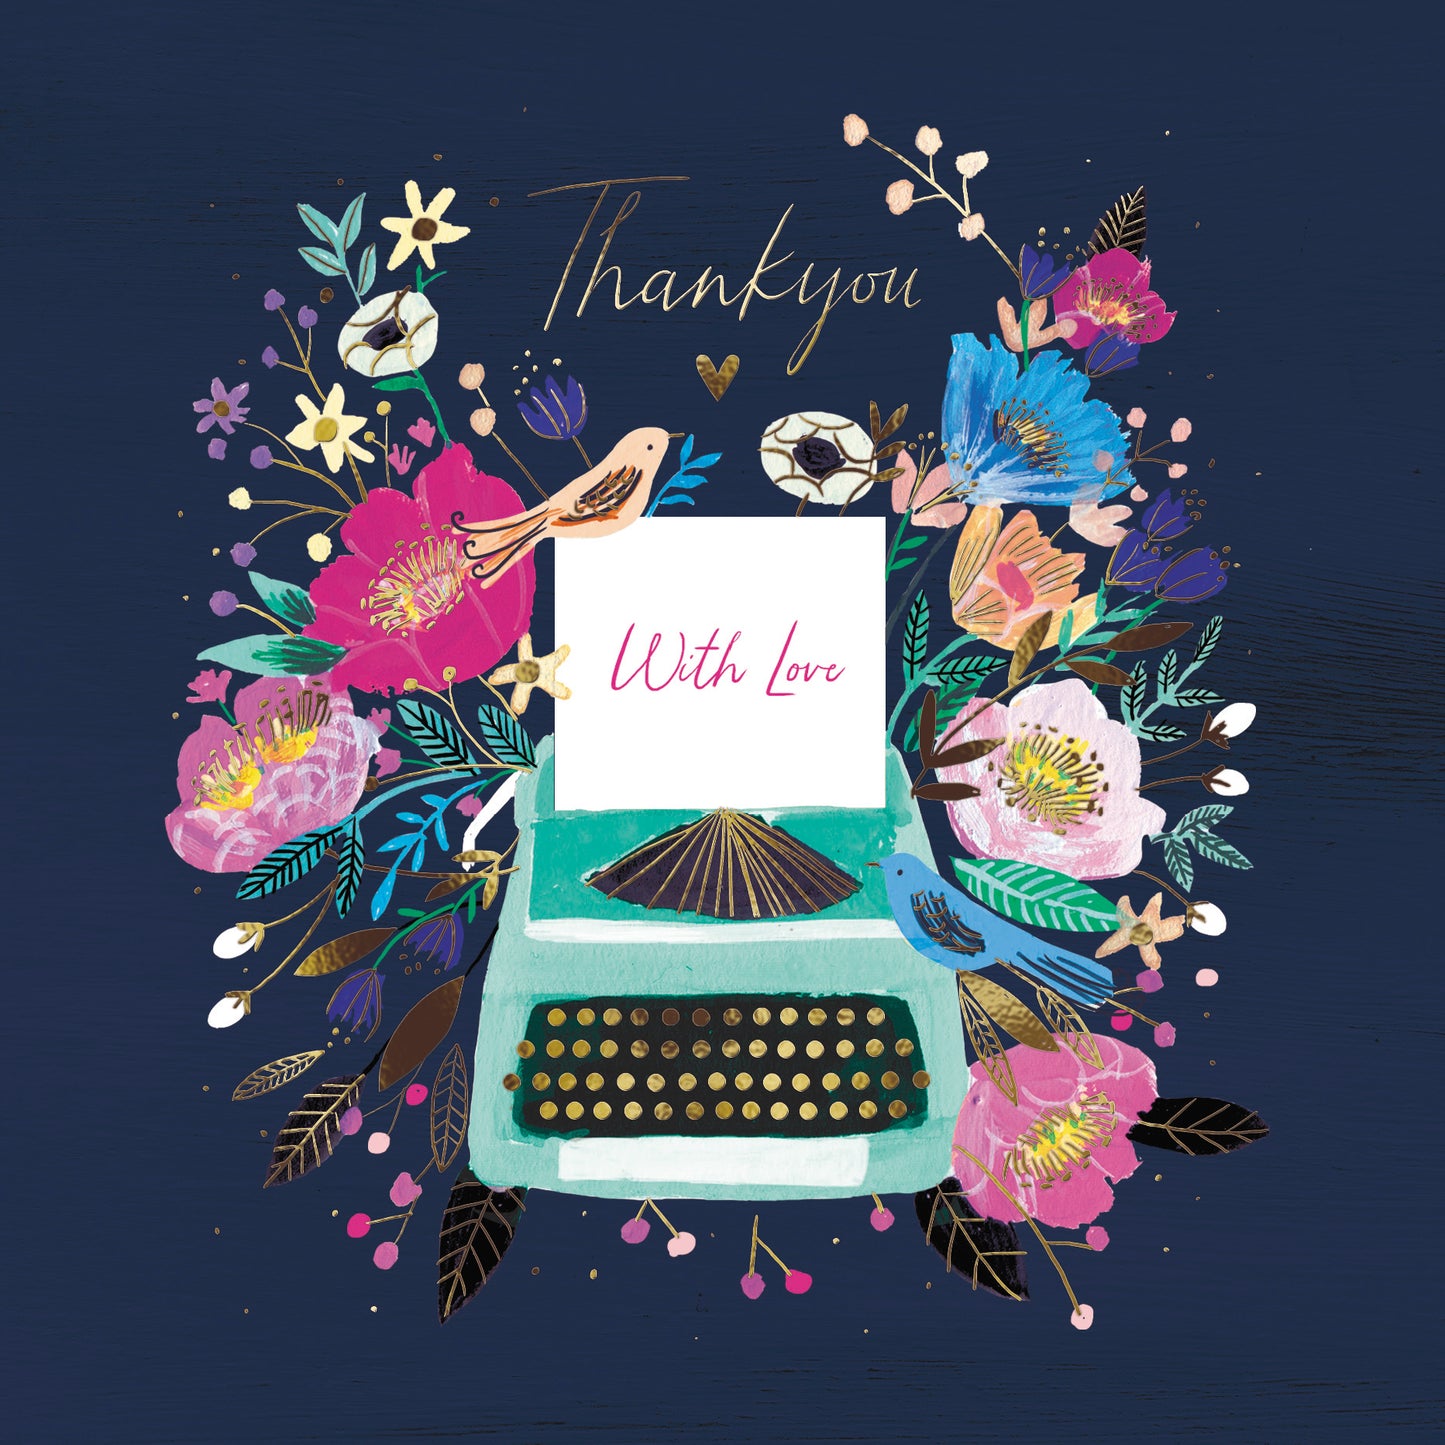 With Love Thank You Typewriter Thank You Greeting Card